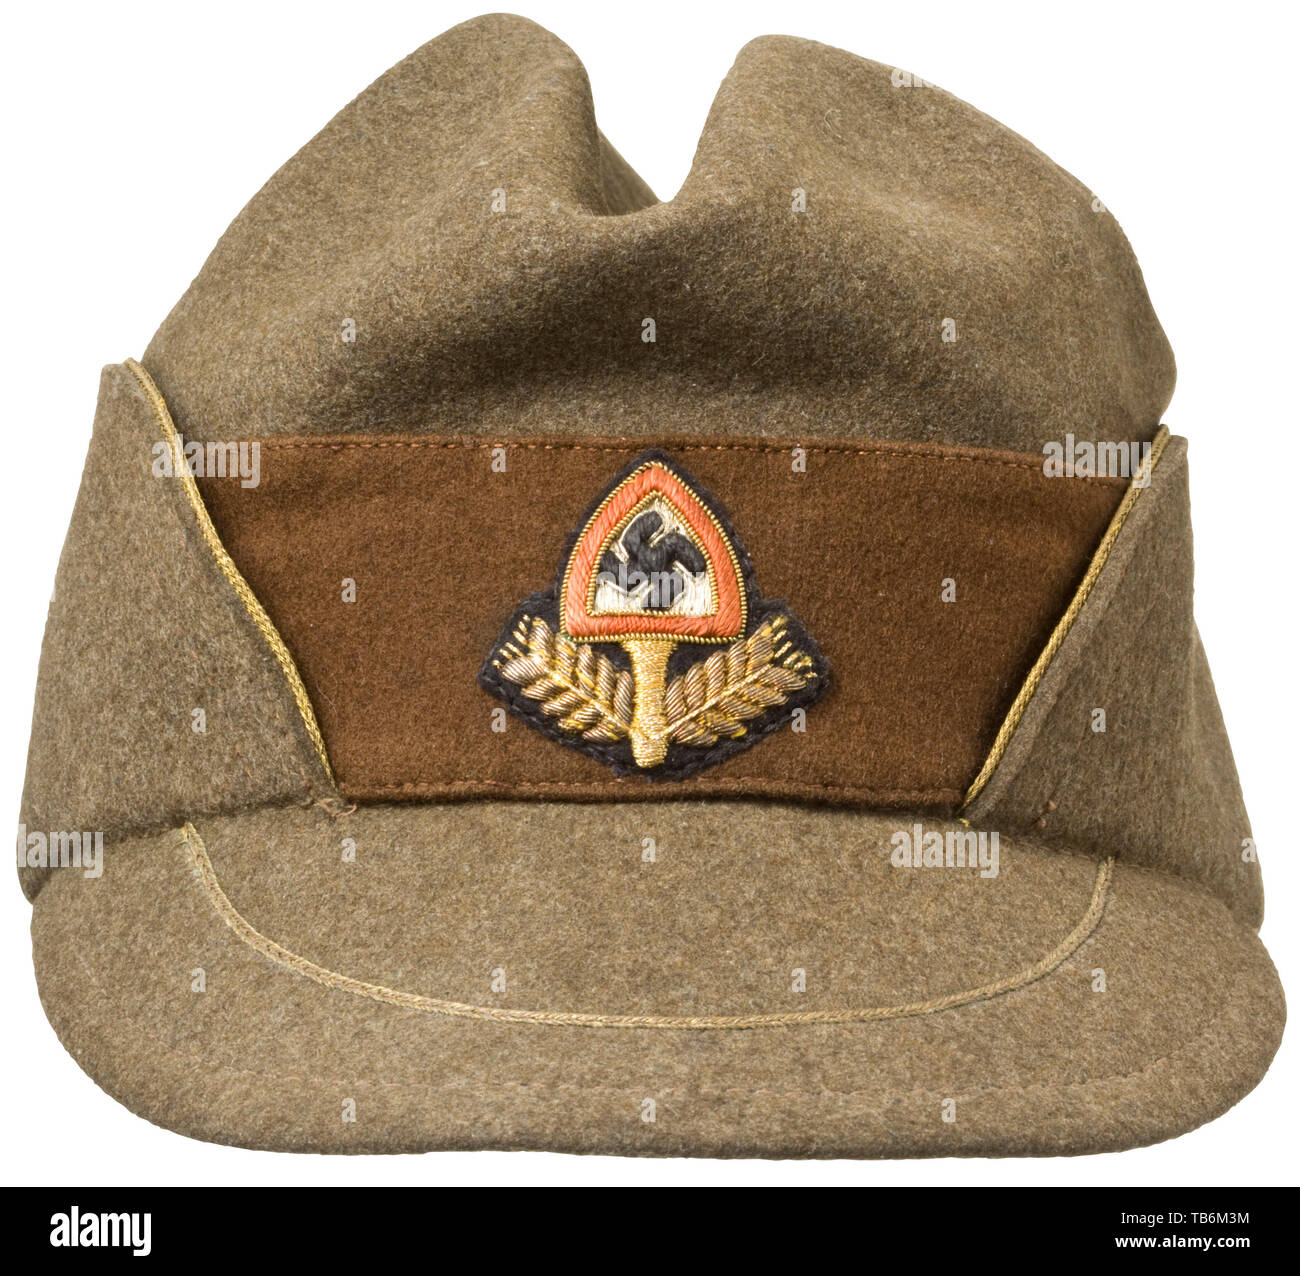 A cap for a RAD Generalarbeitsführer, The so-called 'coffee bean' in earth-brown wool felt with brown cap band, gold pipings and gold embroidered cap badge. Golden-yellow silk liner (signs of usage) with inserted owner tag 'O.E.' and brown leather sweatband. A rare head covering in this rank. In the following lot we offer the corresponding tunic. 20th century, 1930s, Reichsarbeitsdienst, Reich Labor Service, State Labour Service, organisation, organization, organizations, organisations, NS, National Socialism, Nazism, Third Reich, German Reich, Germany, National Socialist, , Editorial-Use-Only Stock Photo